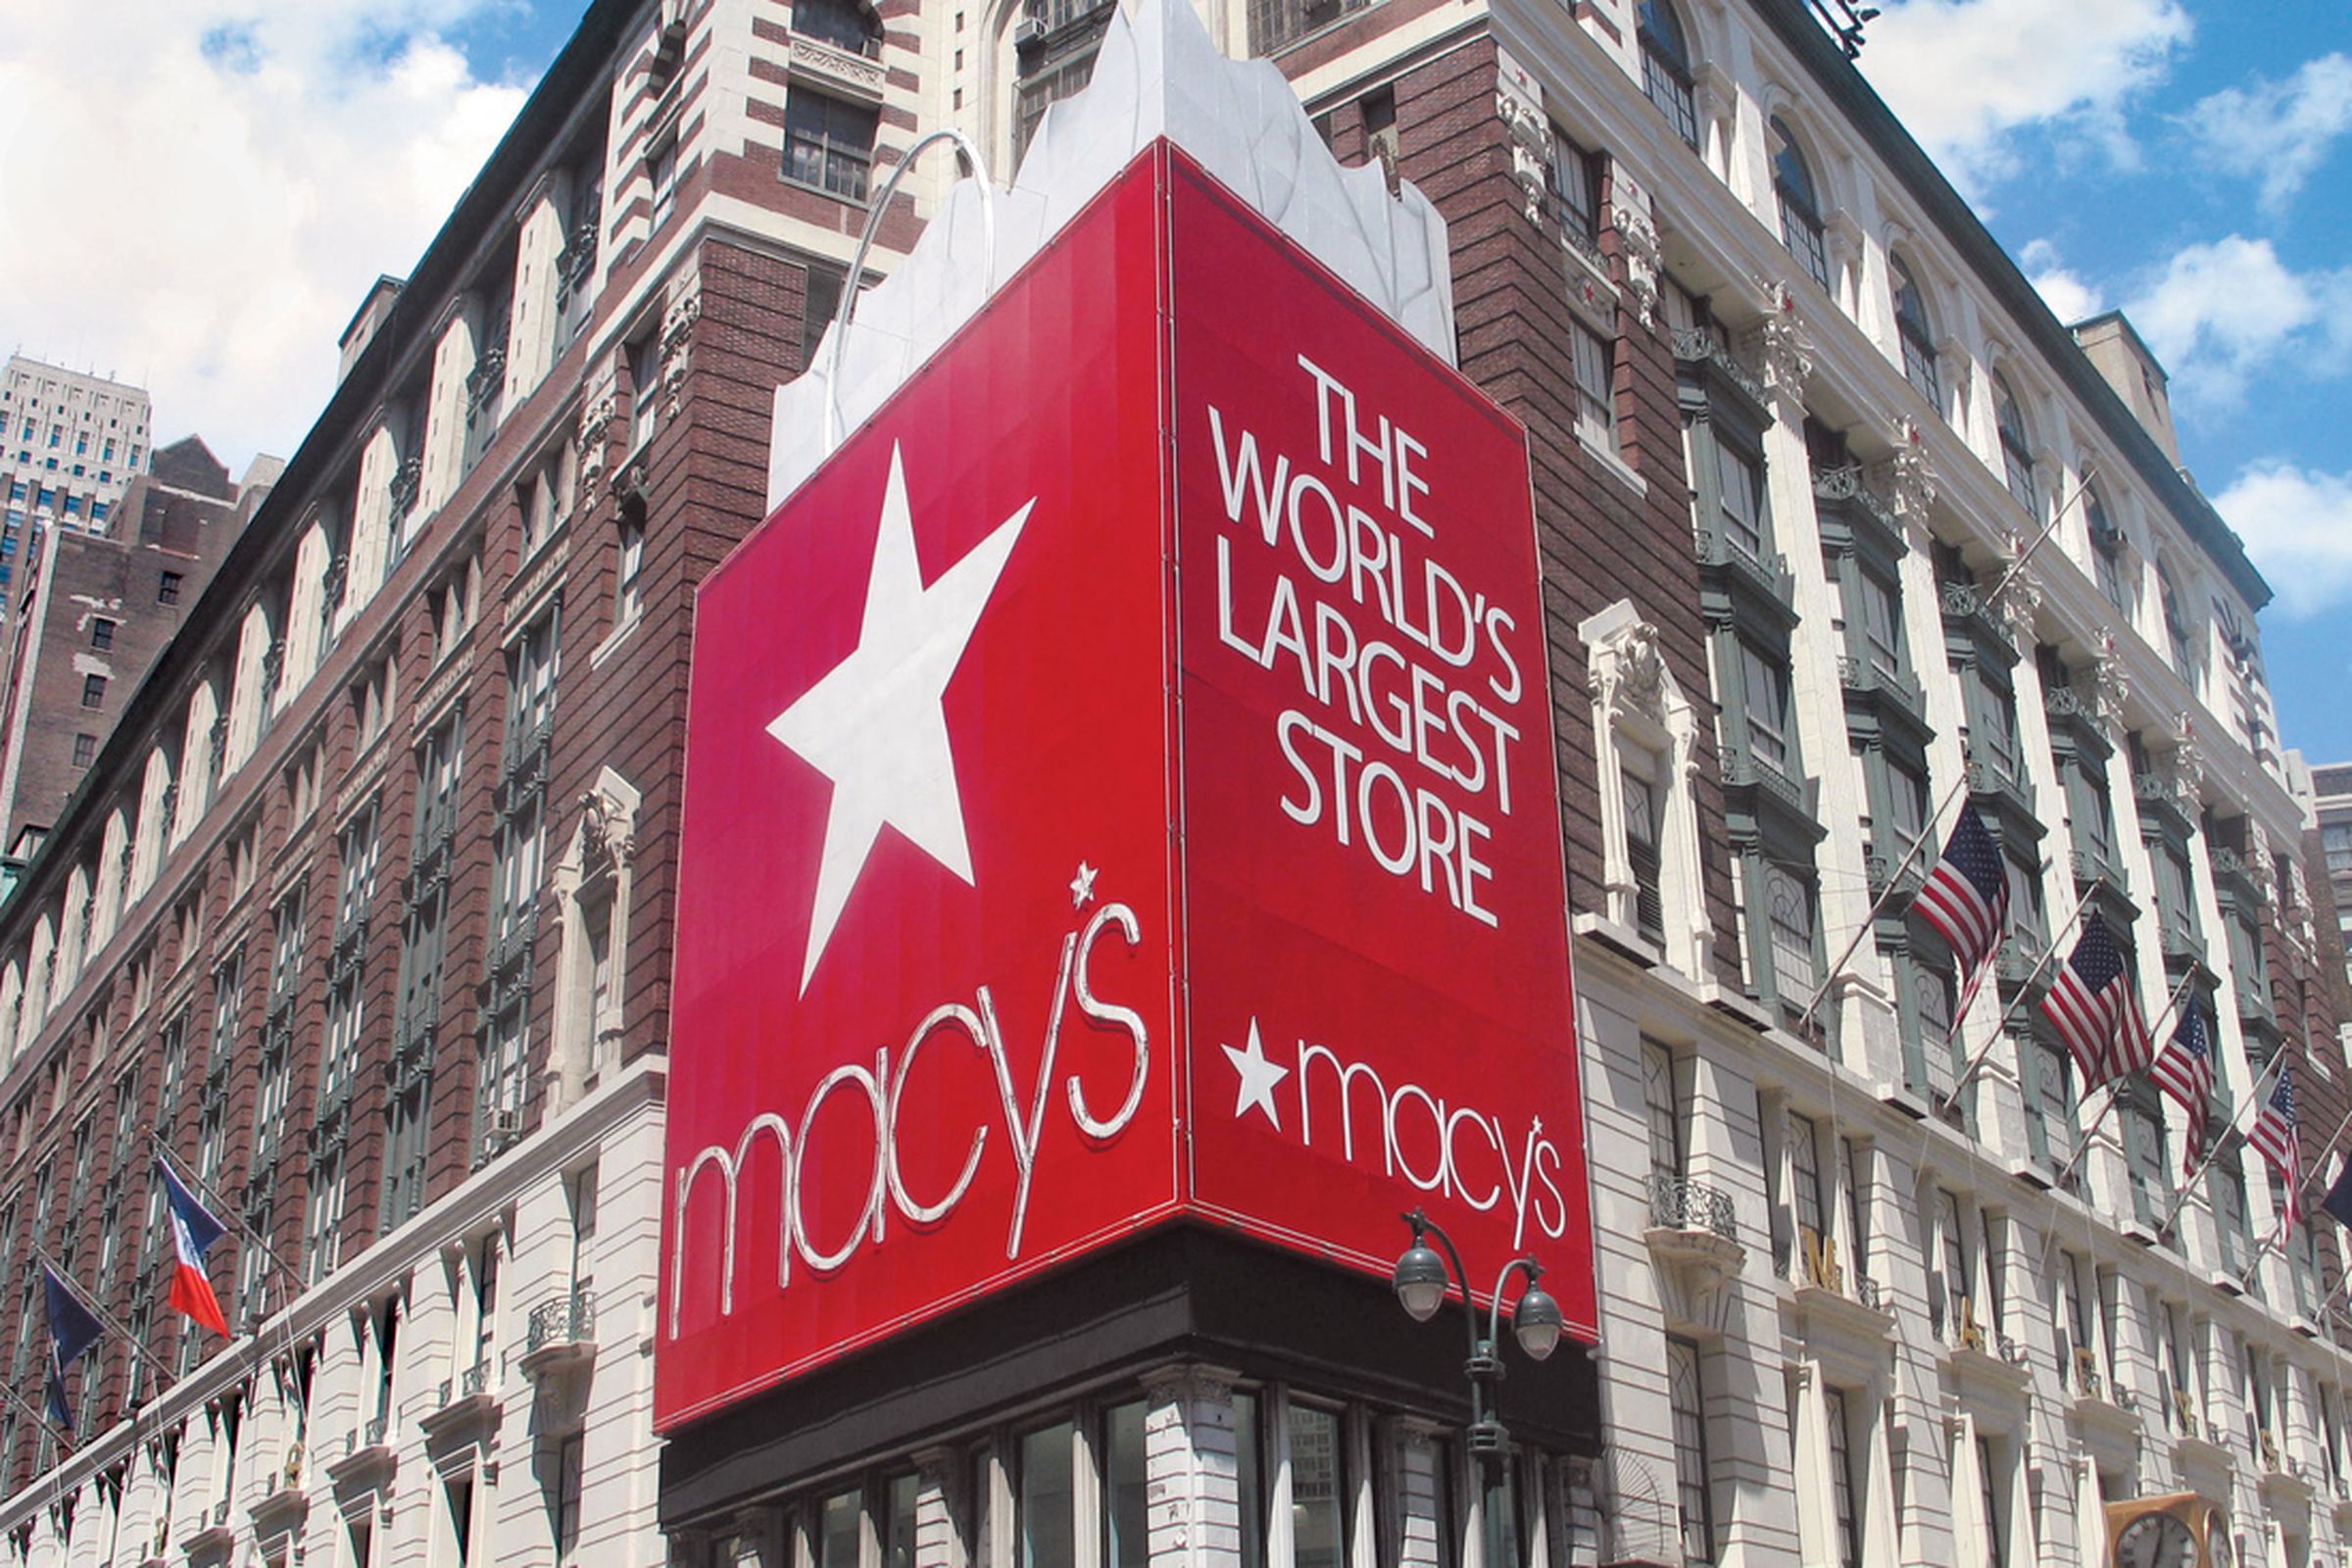 macy’s herald square (from MACY’S)